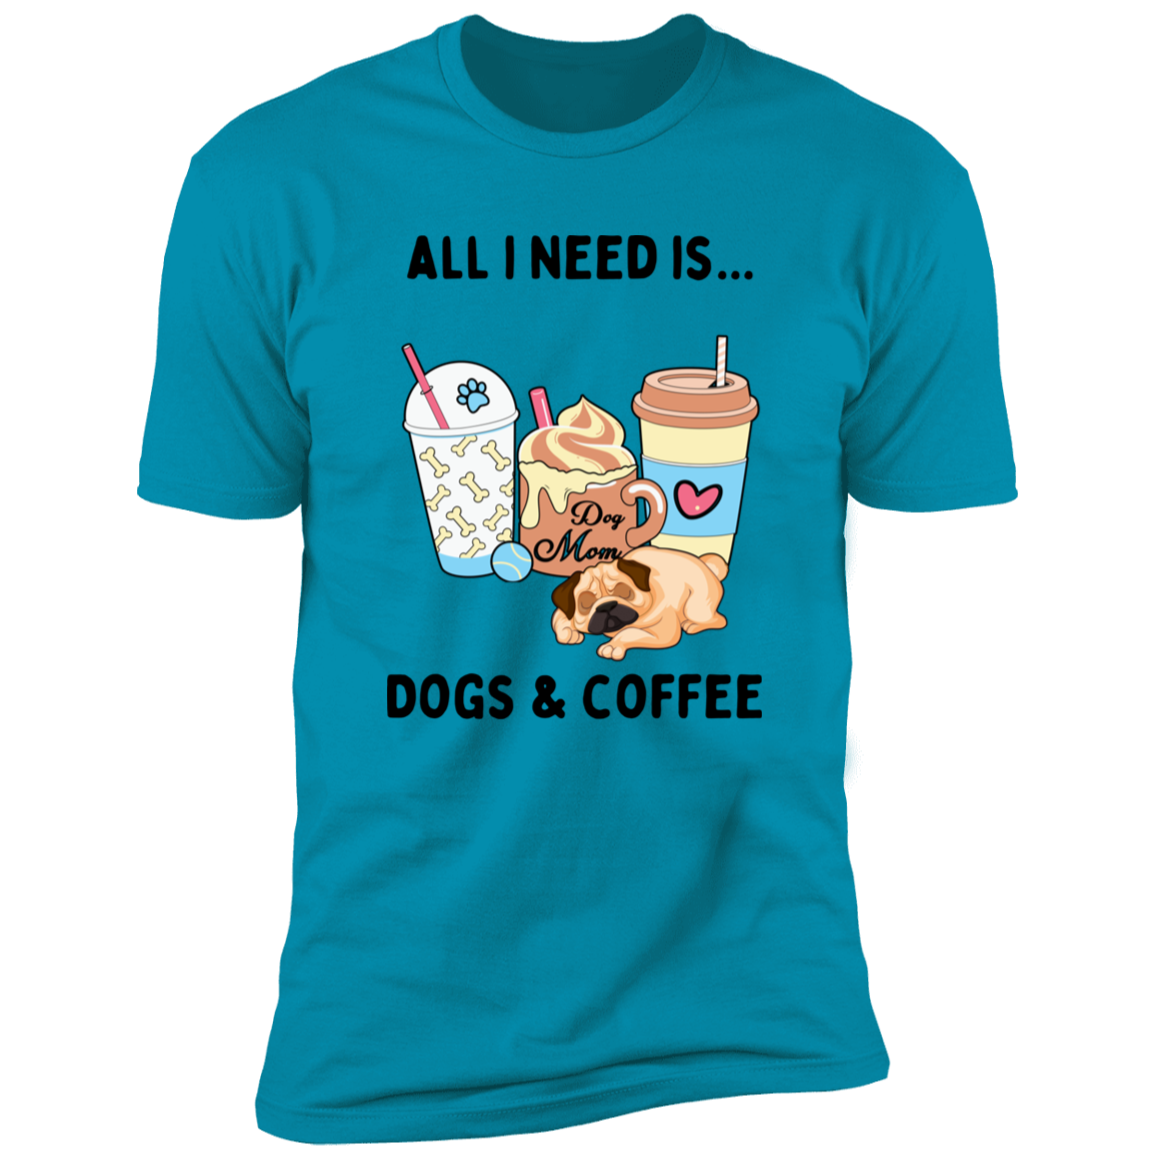 All I Need is Dogs and Coffee, Dog shirt for humas, in turquoise